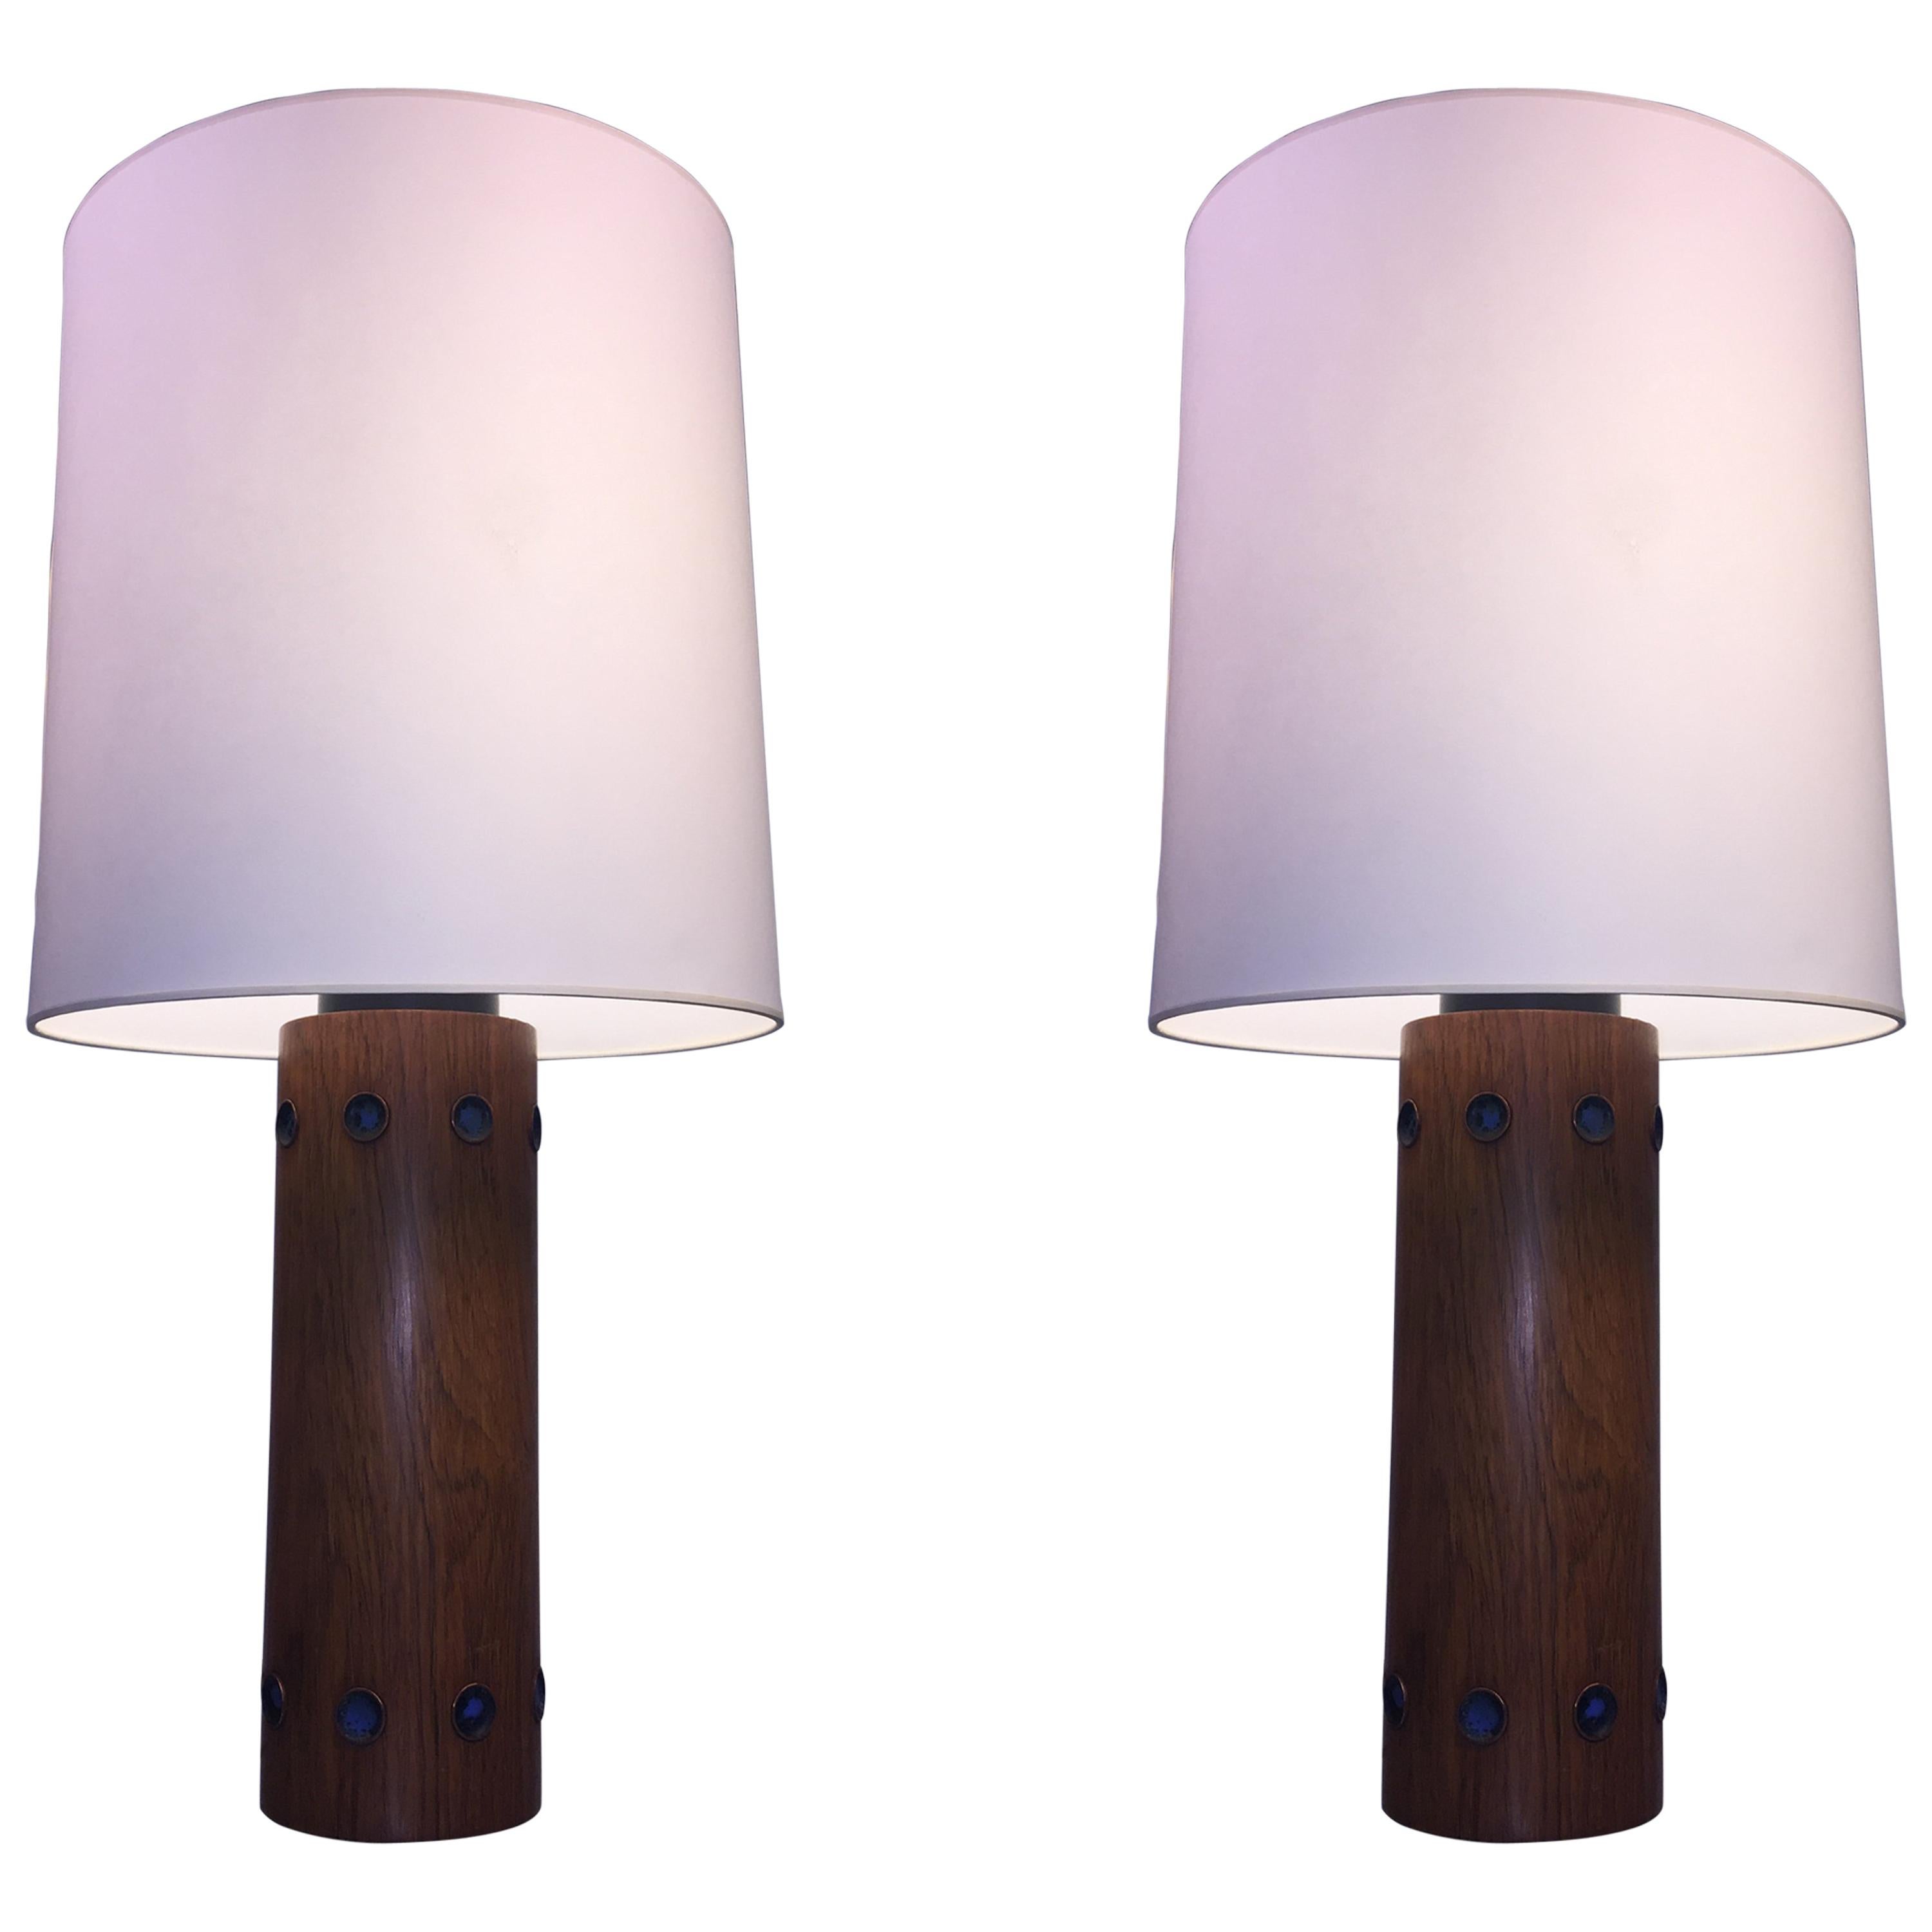 Pair of Italian Walnut and Enameled Copper Midcentury Lamps For Sale